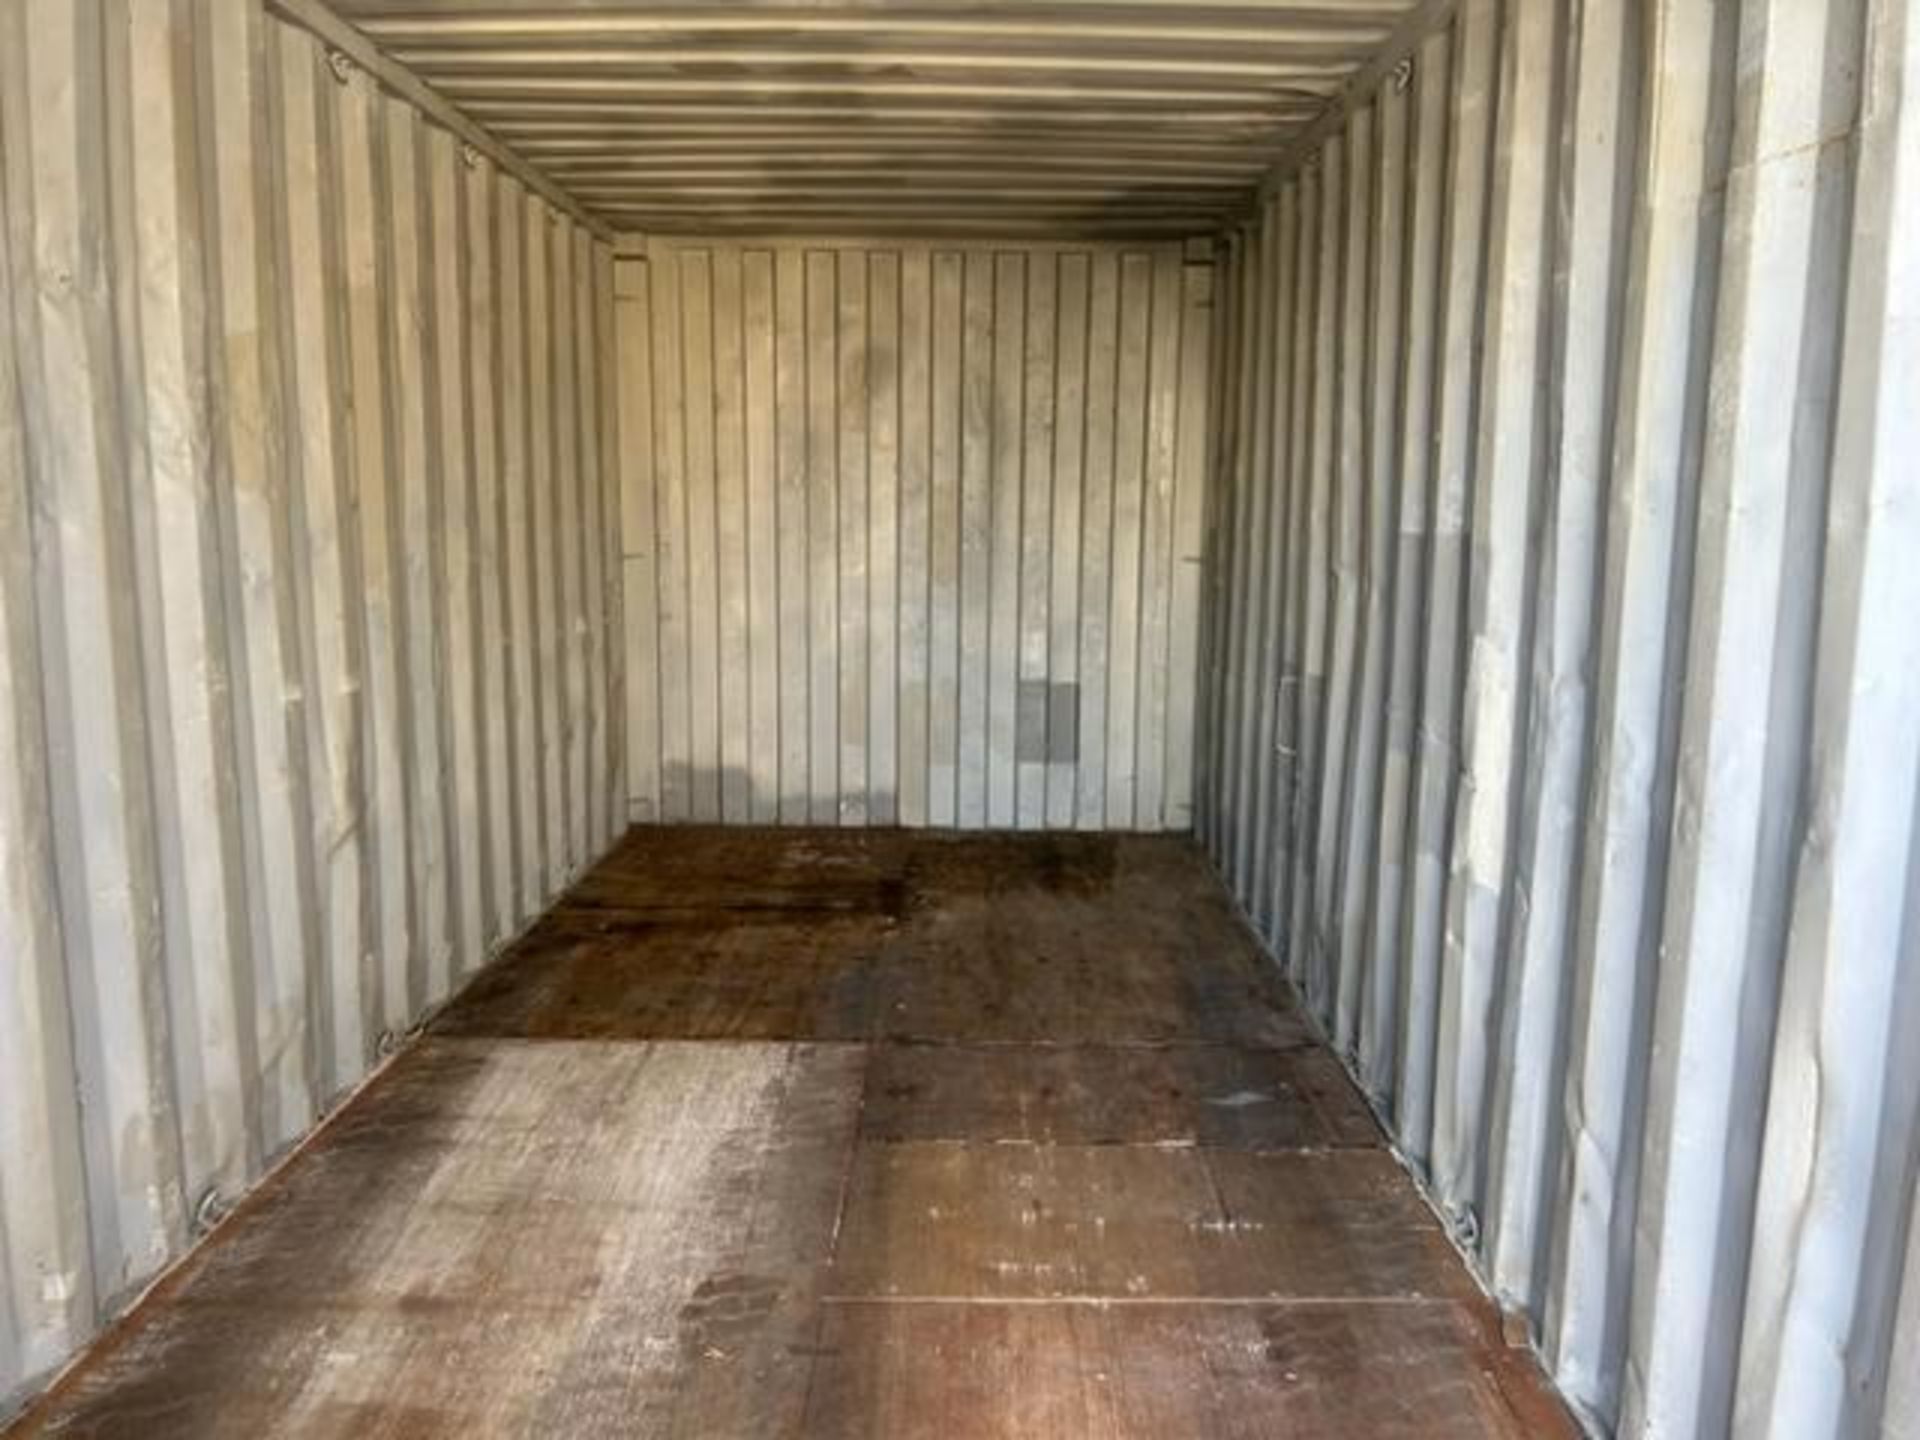 20' Sea Container SN#: CAIU2033453 (Located in S.E. Calgary) - Image 8 of 10